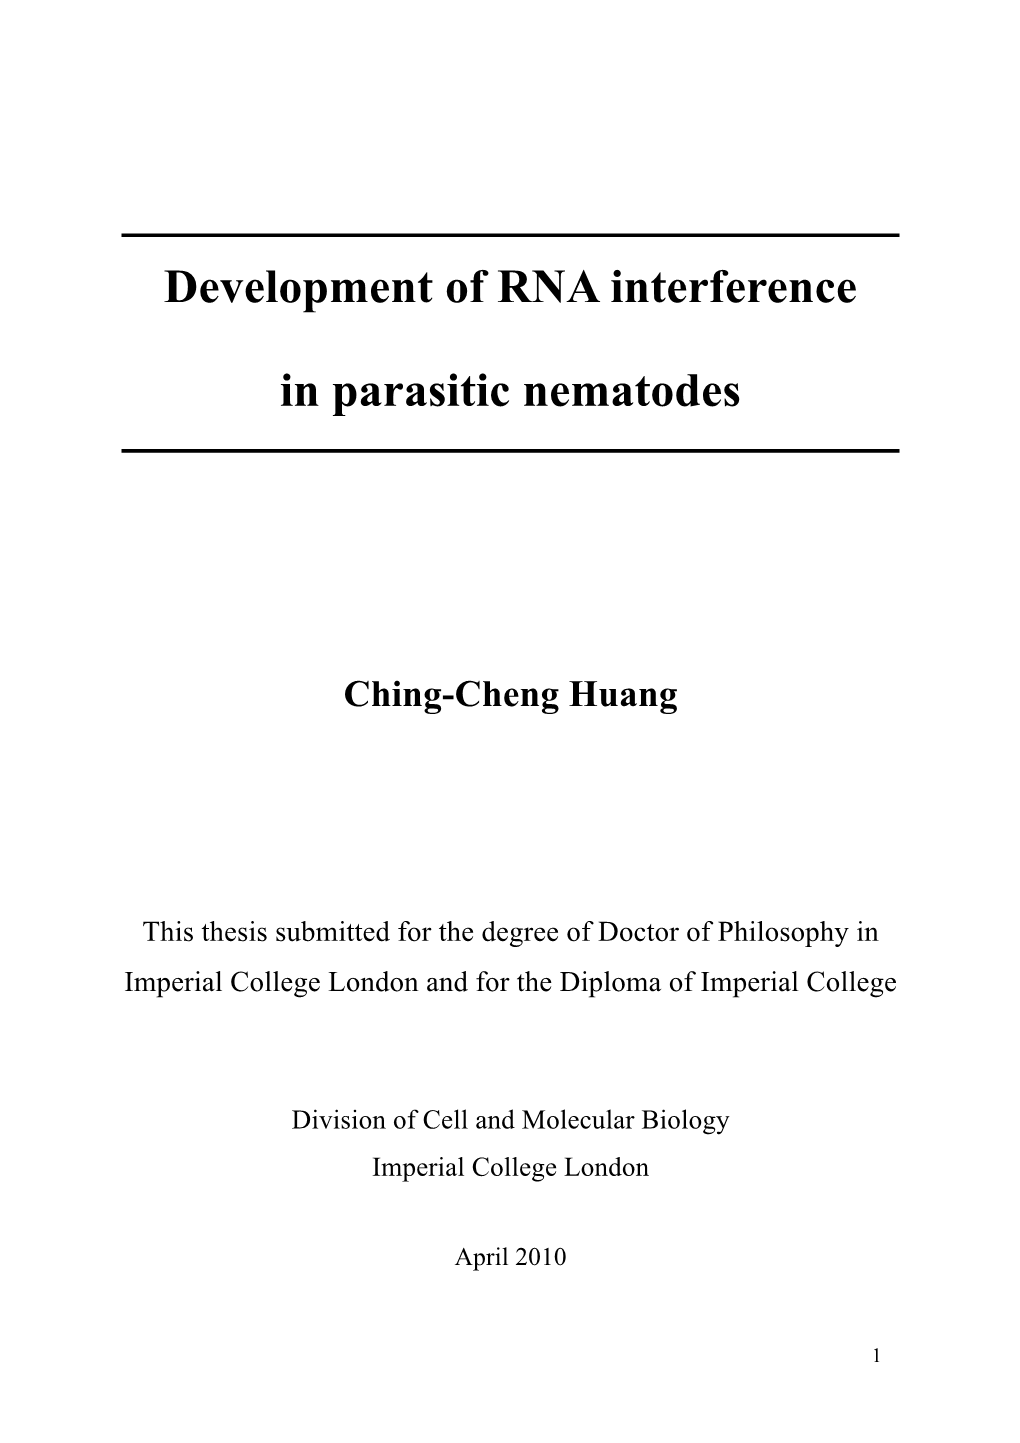 Phd Thesis Ching-Cheng Huang Imperial College London